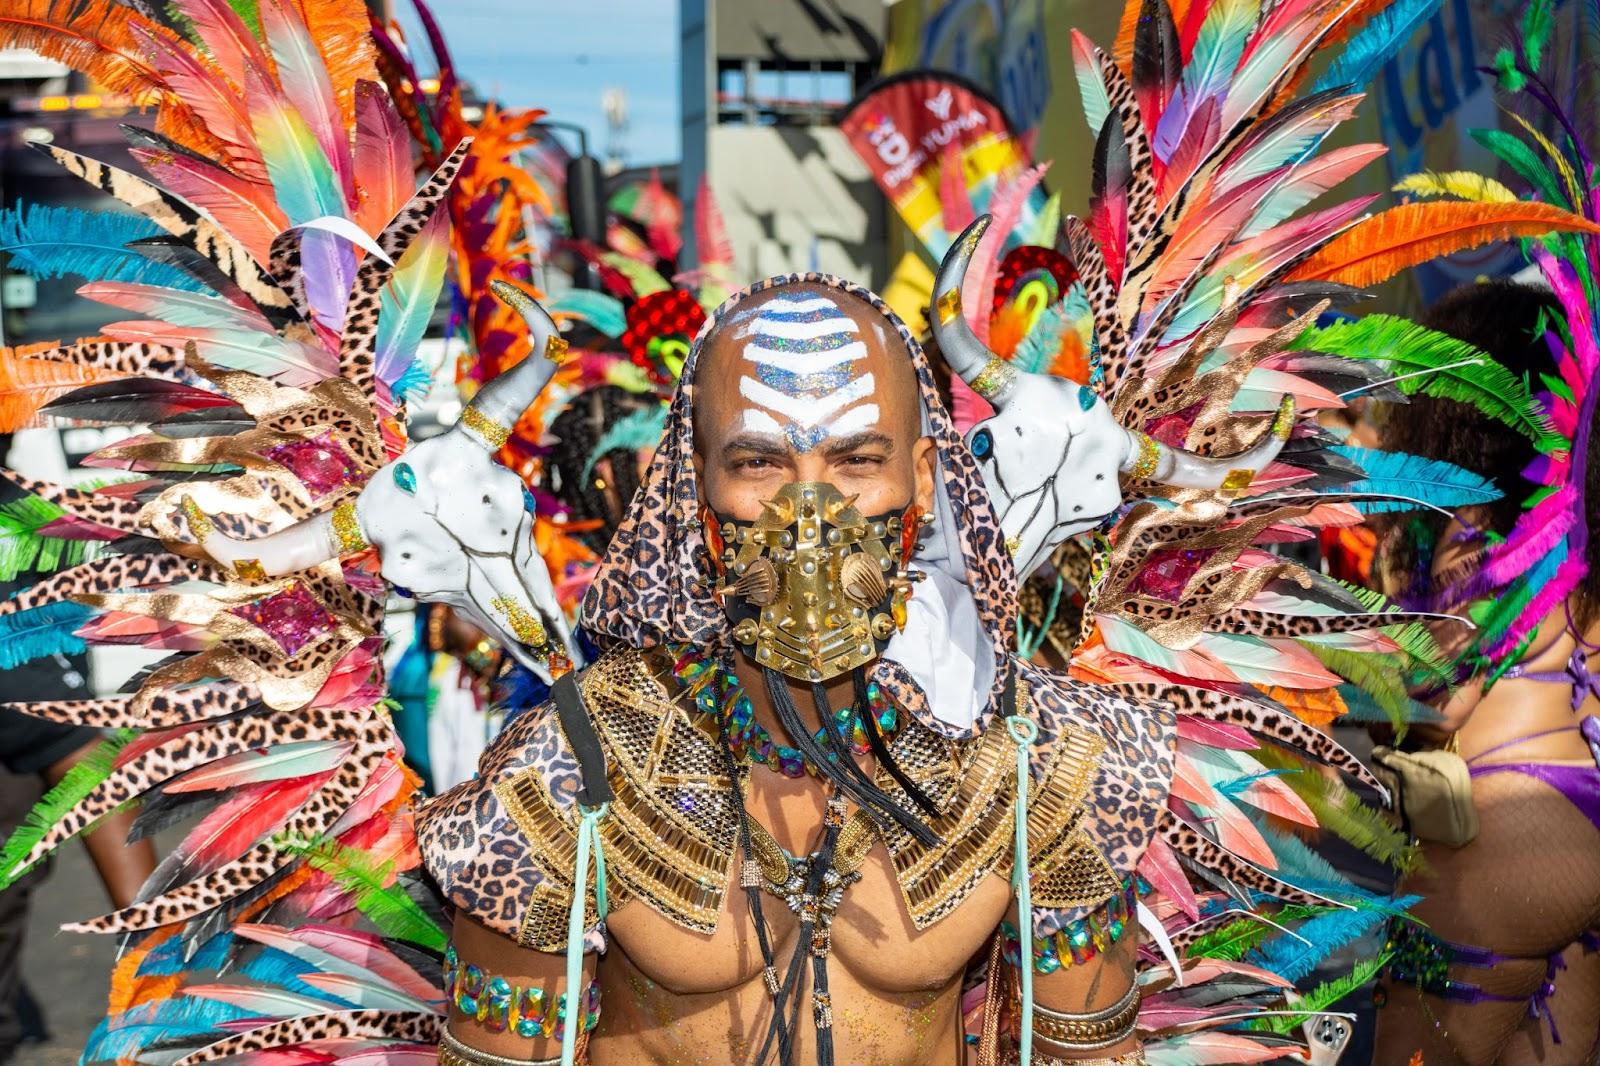 A male Masquerader enjoys himself in the Yuma Carnival  in Port of Spain, Trinidad.